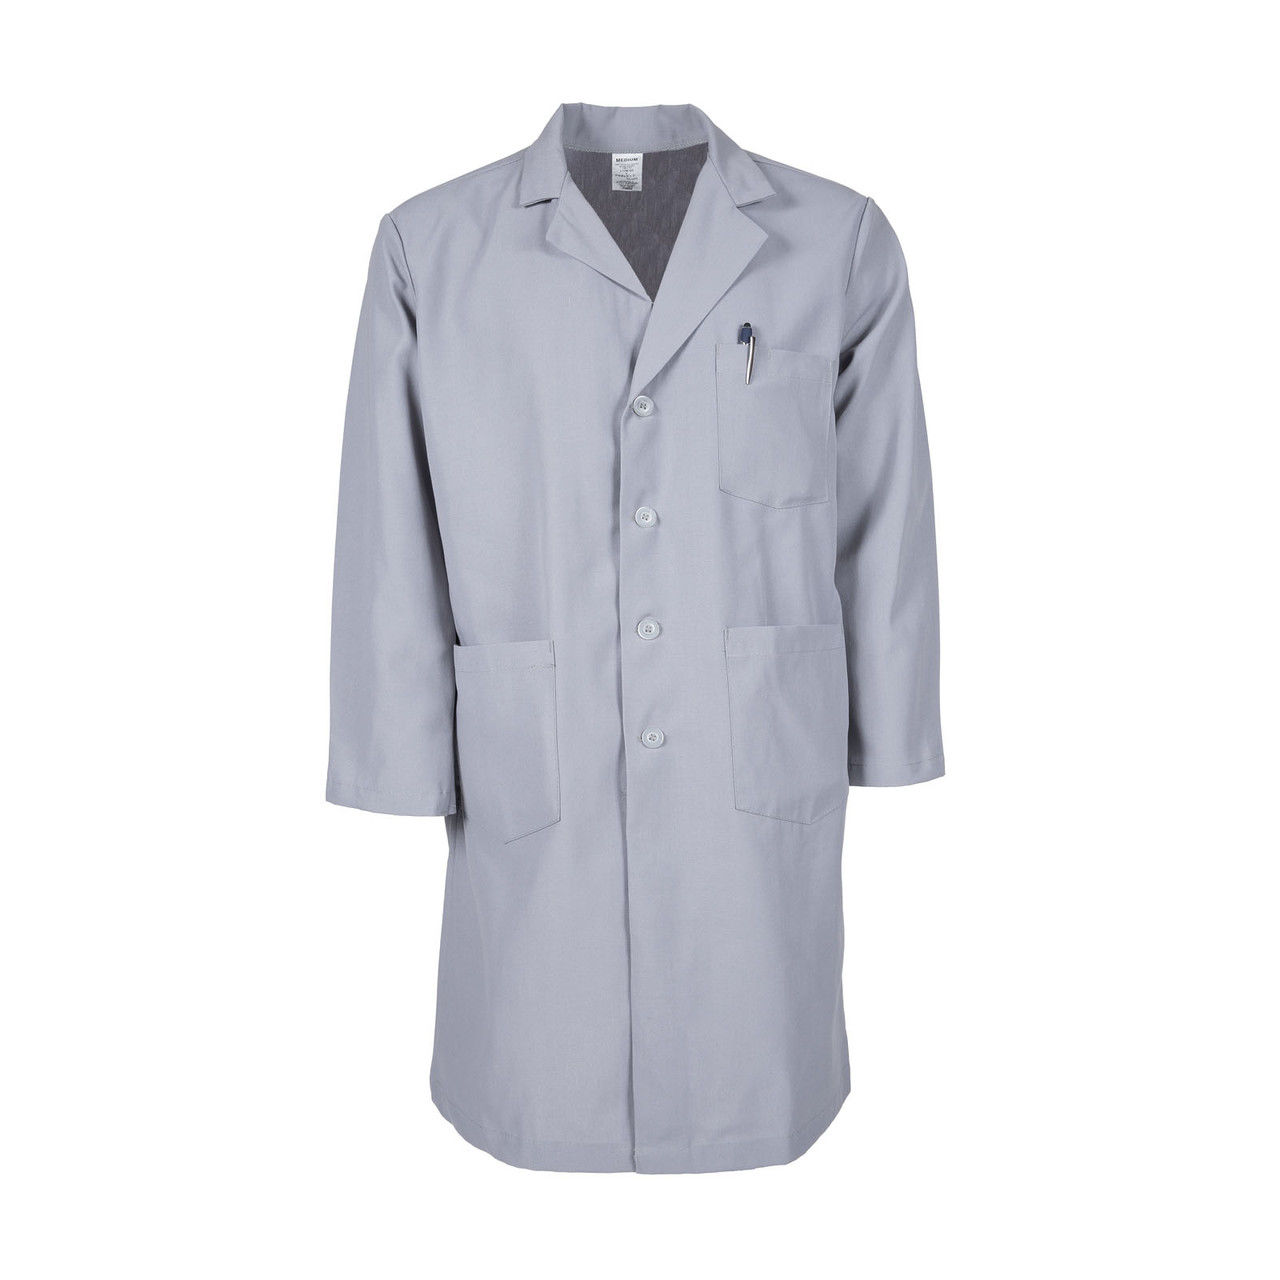 Is the Men's Button Lab Coat in grey lab coats?